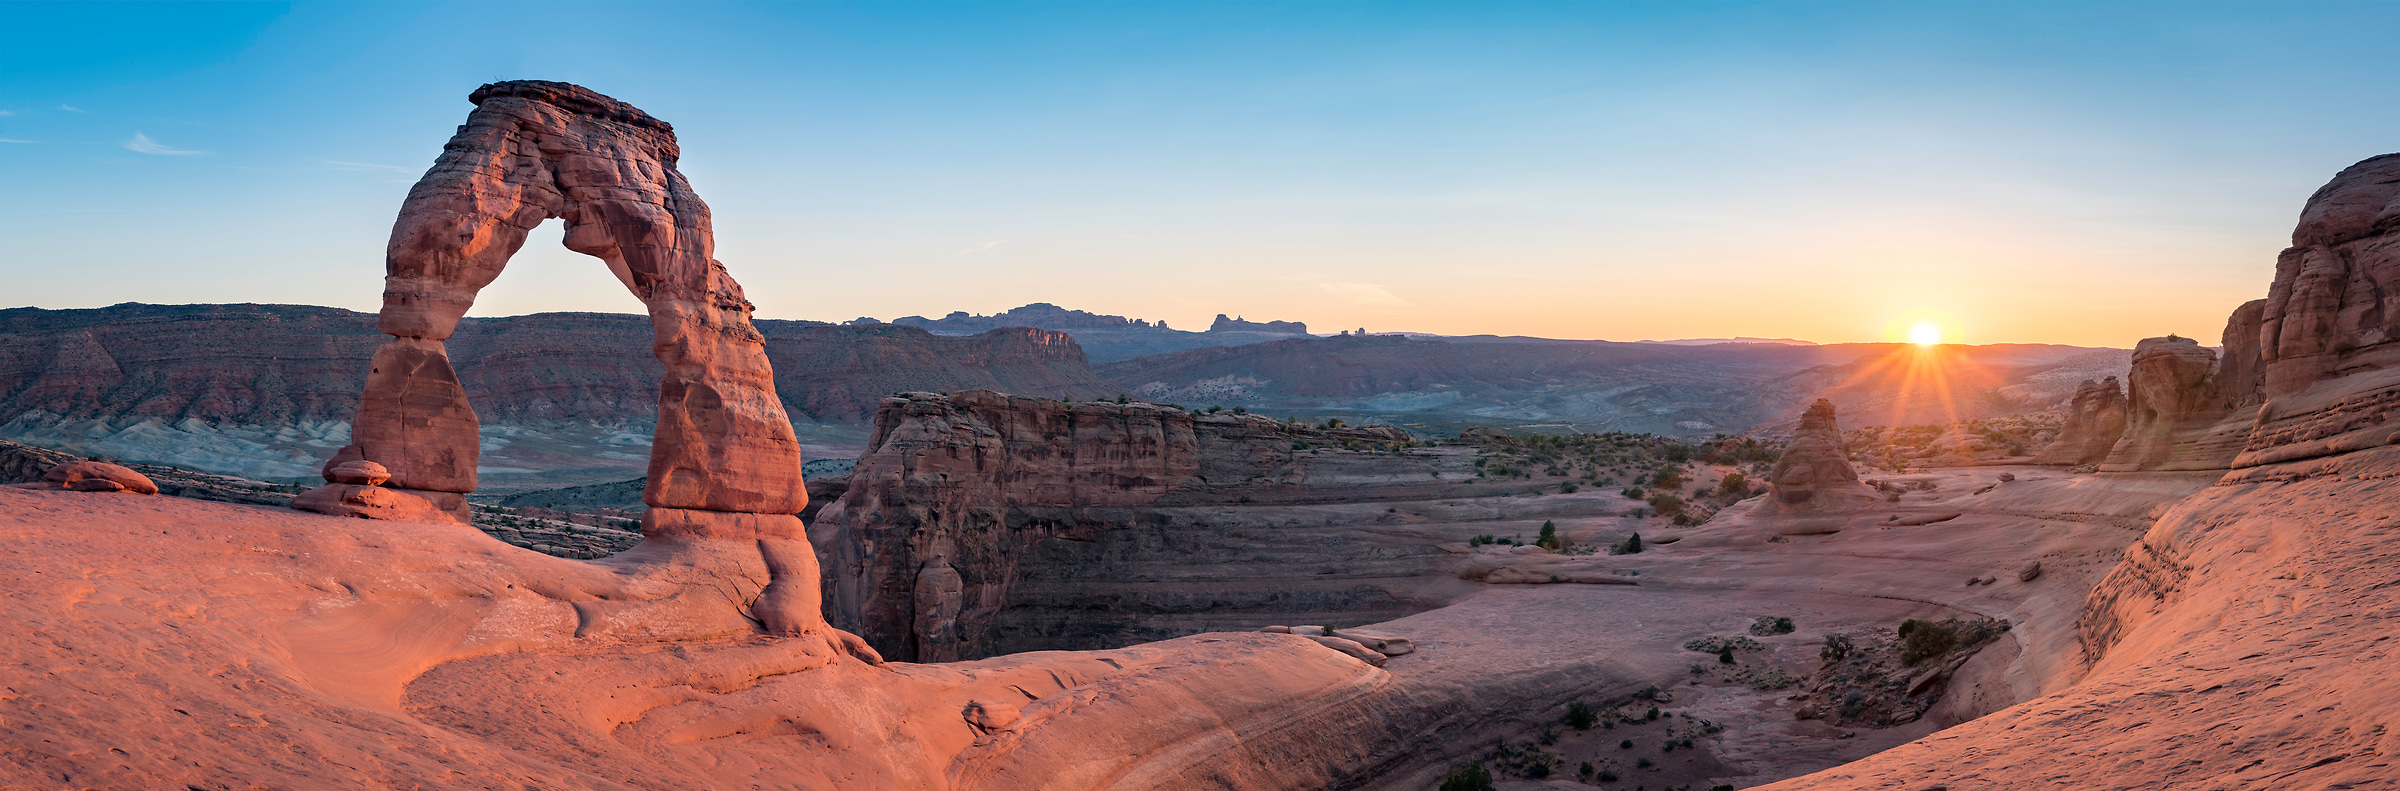 365 megapixels! A very high resolution, large-format VAST photo print of an American panorama landscape at sunset; fine art photo of Delicate Arch created by Justin Katz in Arches National Park, Moab, Utah.